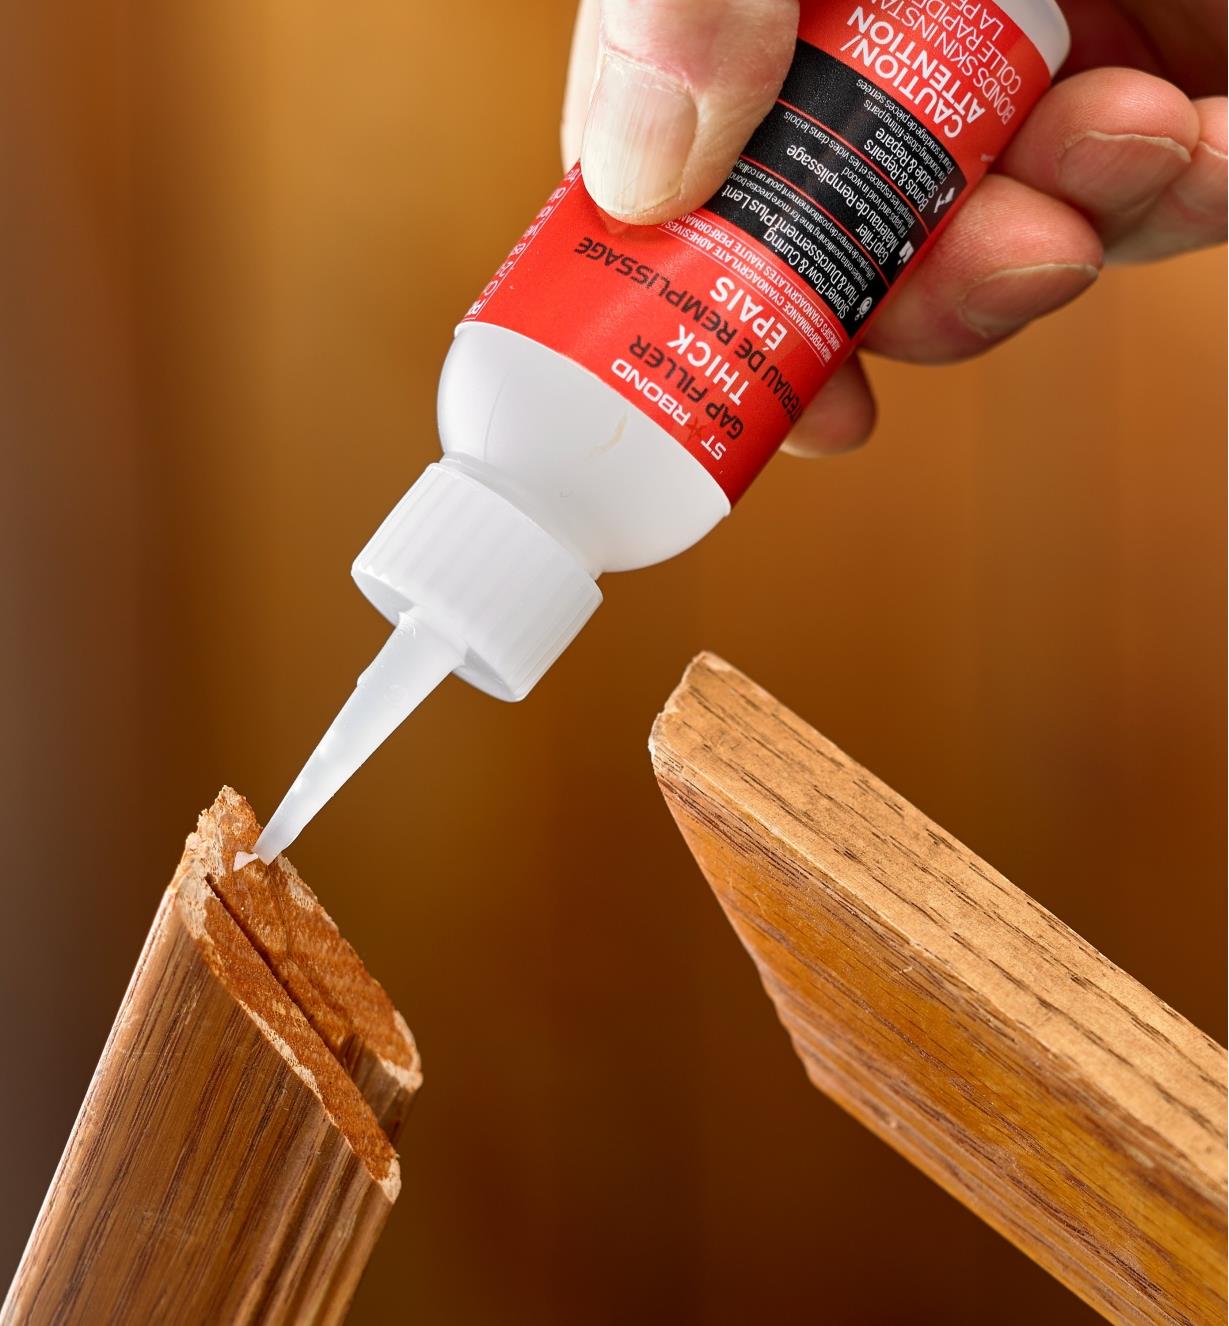 Applying Starbond thick CA glue to the miters of a picture frame